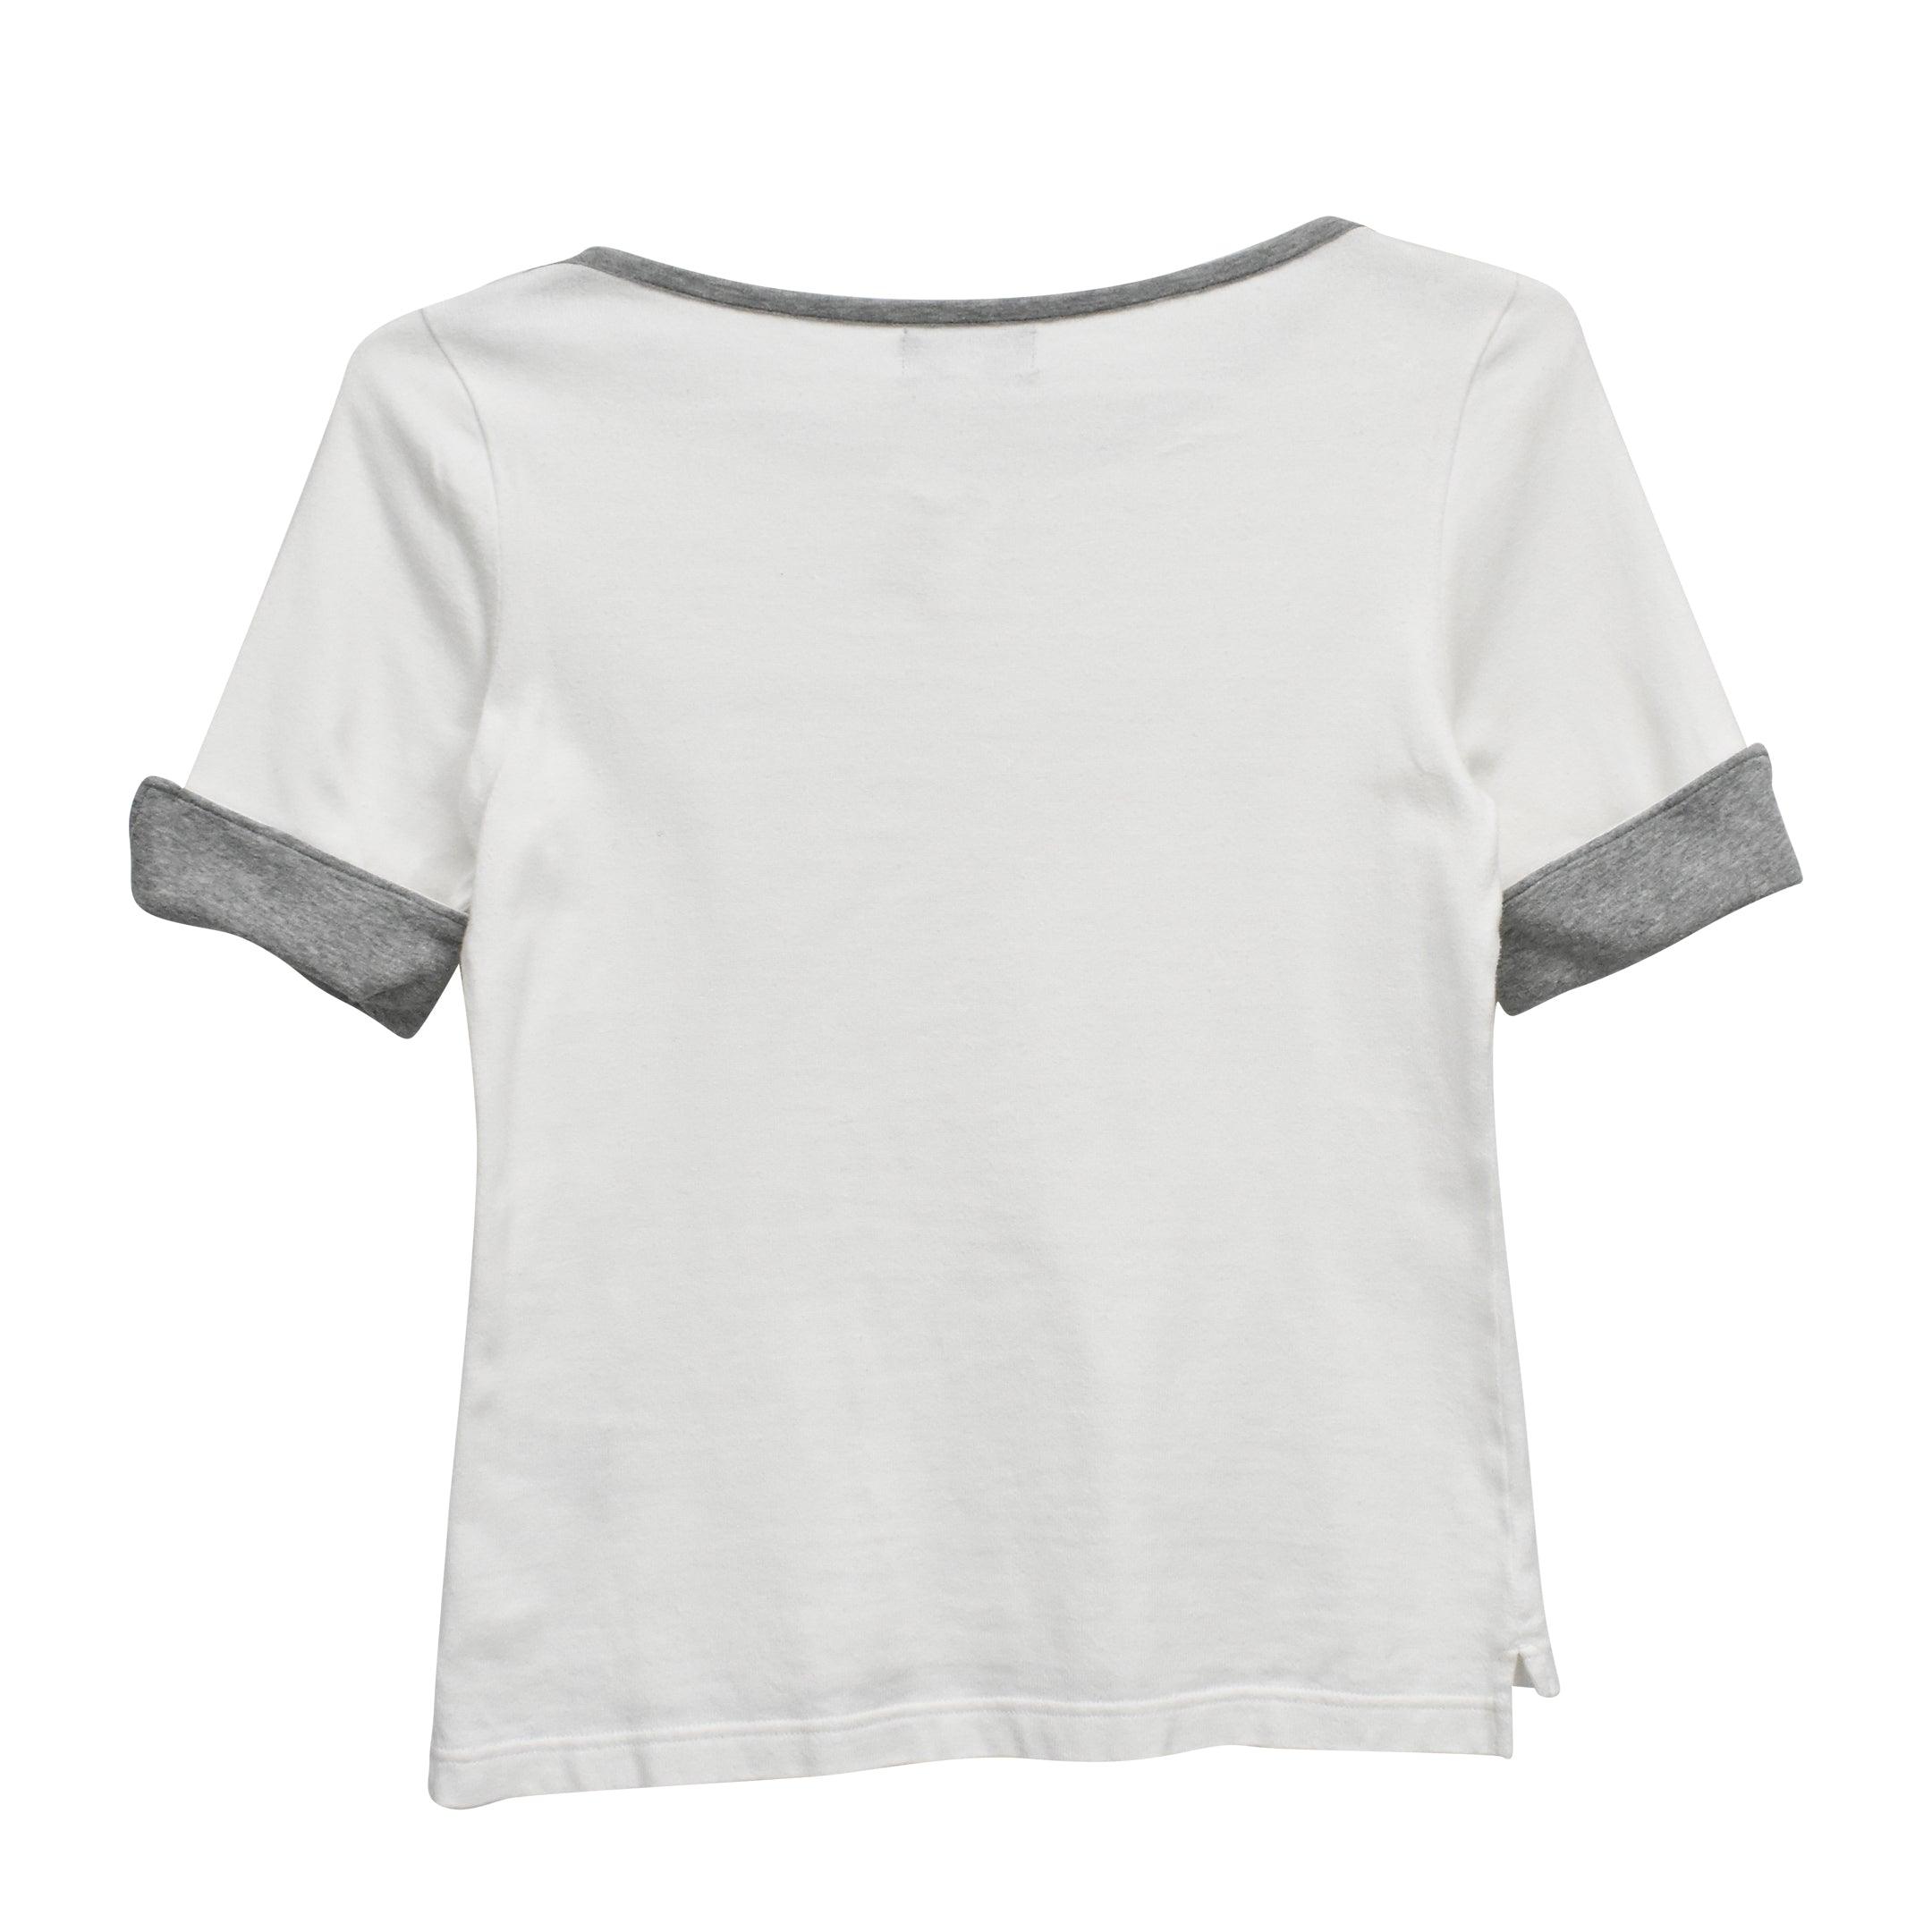 Burberry Blue Label T-Shirt - Women's 38 - Fashionably Yours